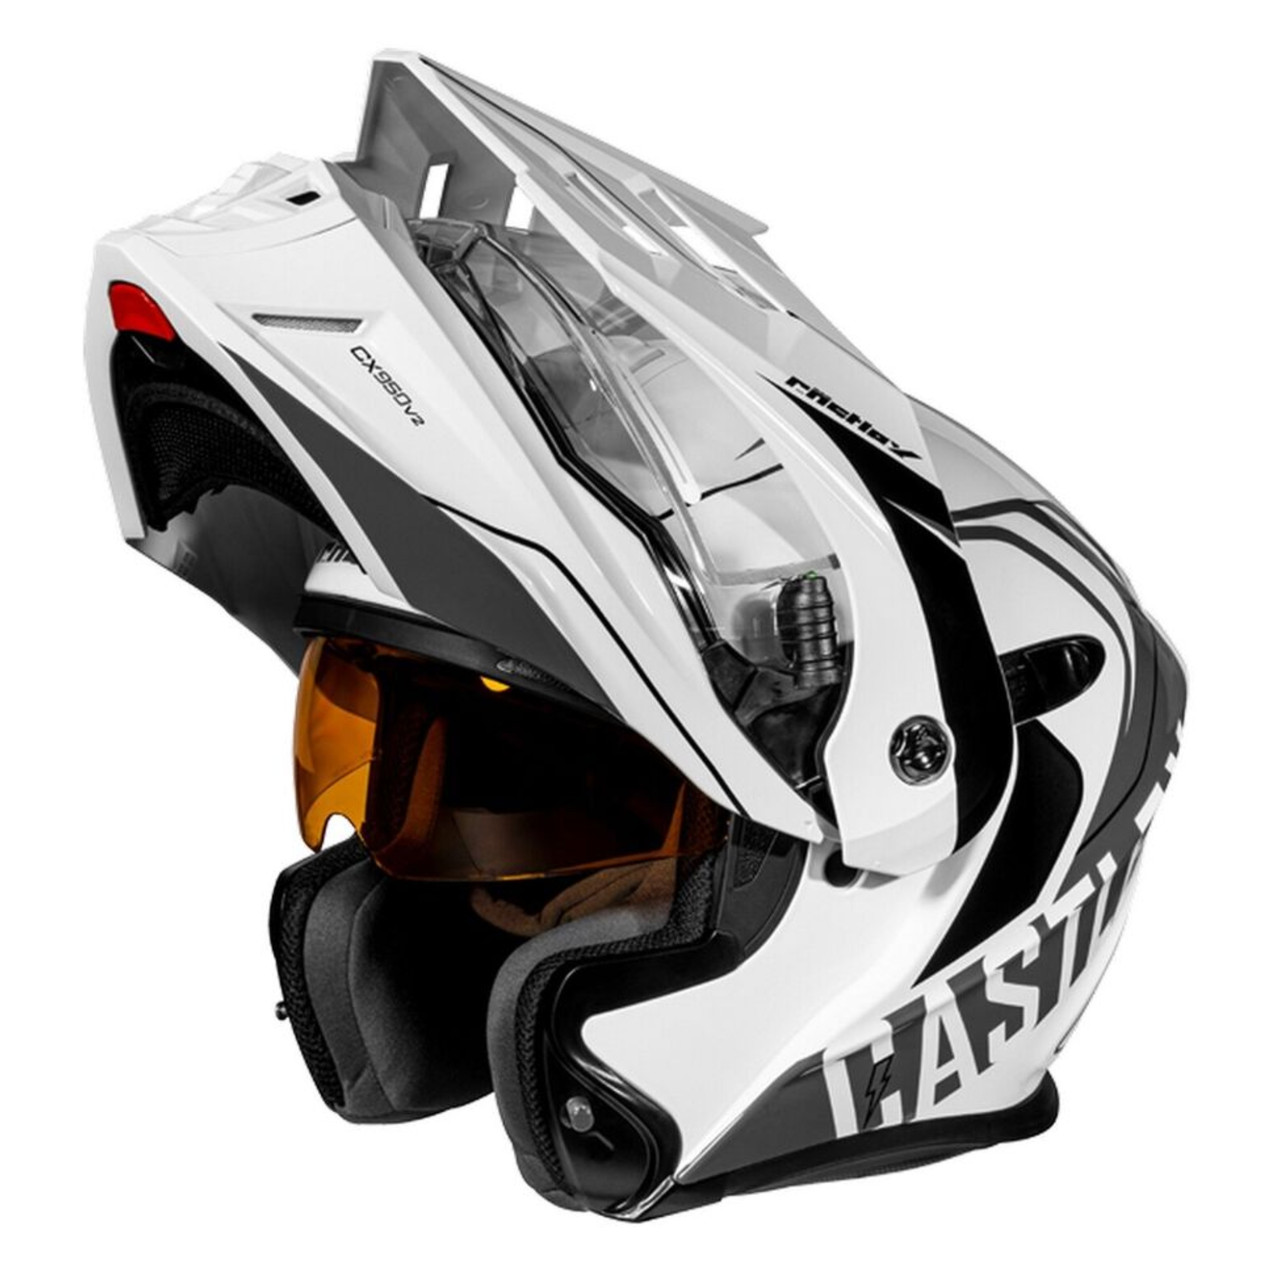 Castle X New Large Matte White/Charcoal CX950V2 Electric Wake Helm, 45-22106